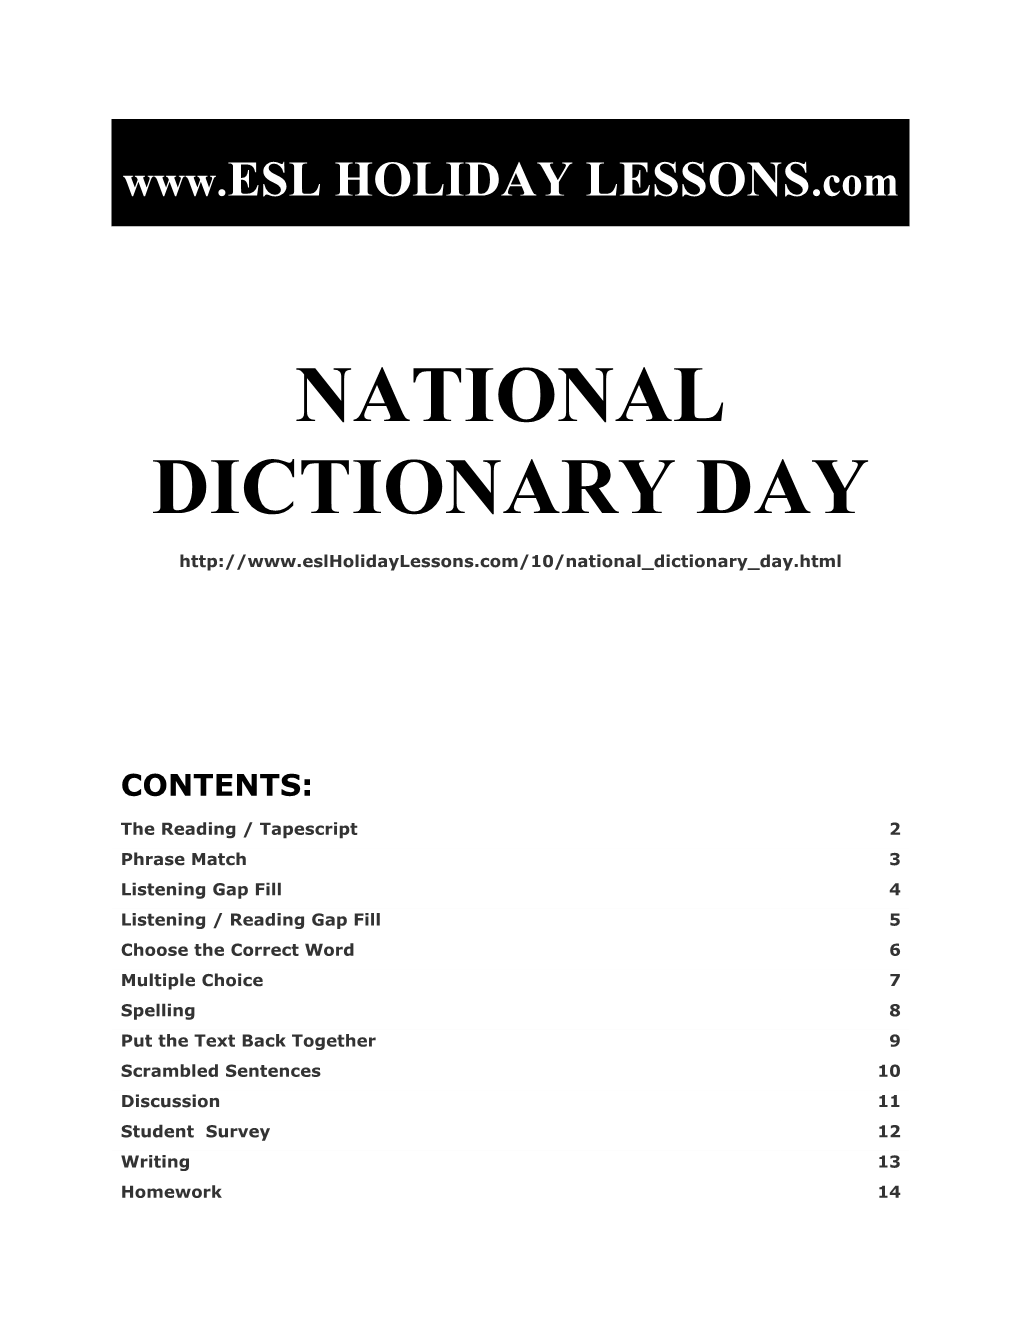 Holiday Lessons - National Dictionary Day